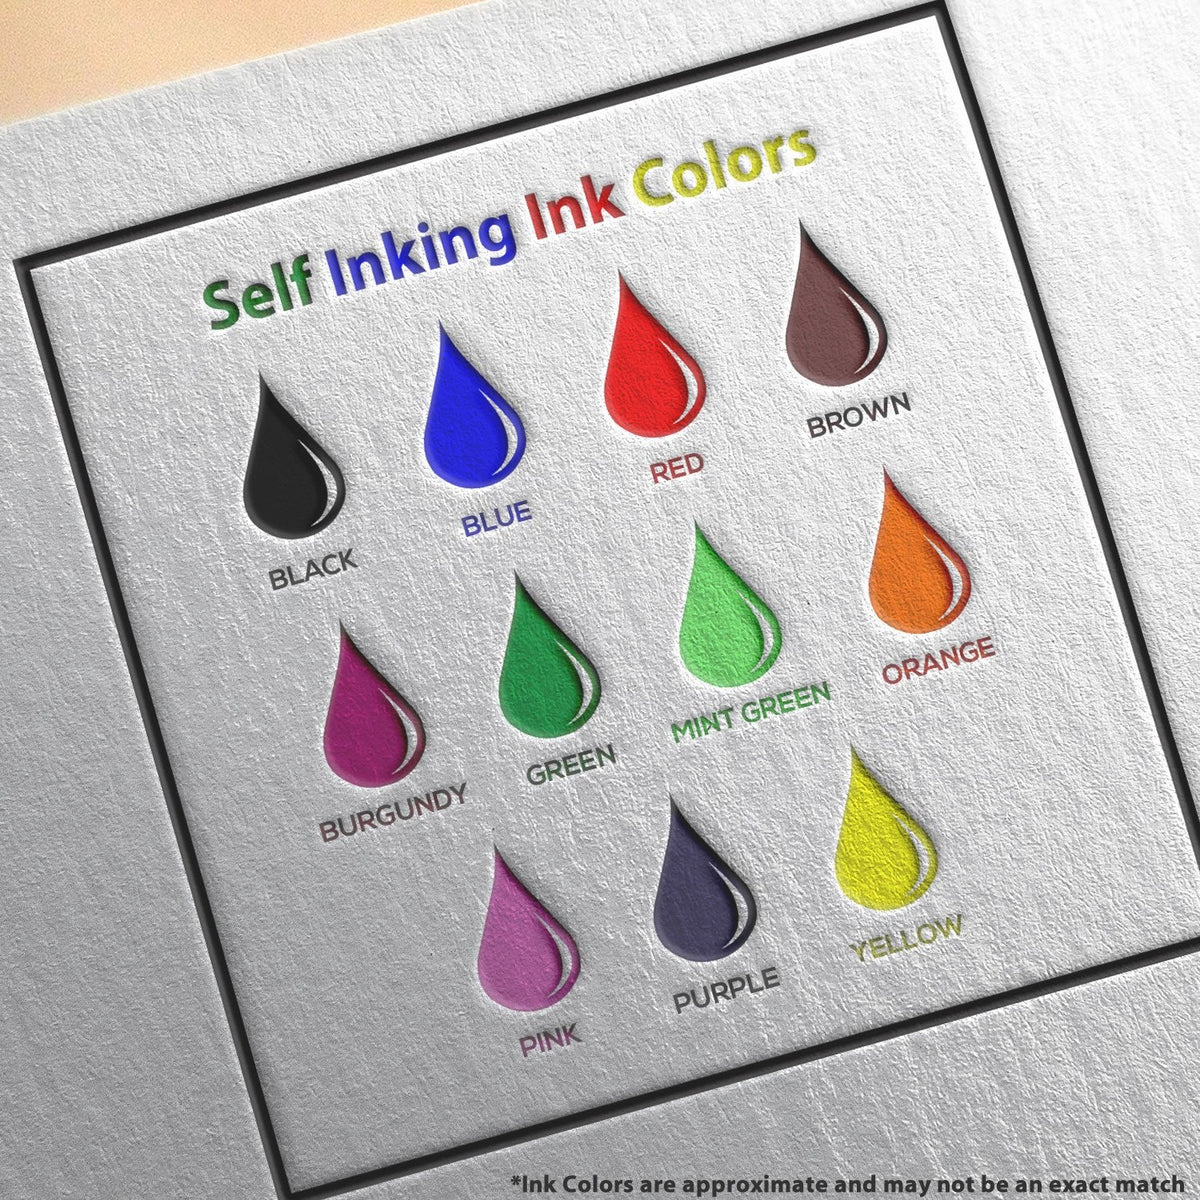 Self-Inking Round Happy Face Stamp Ink Color Options